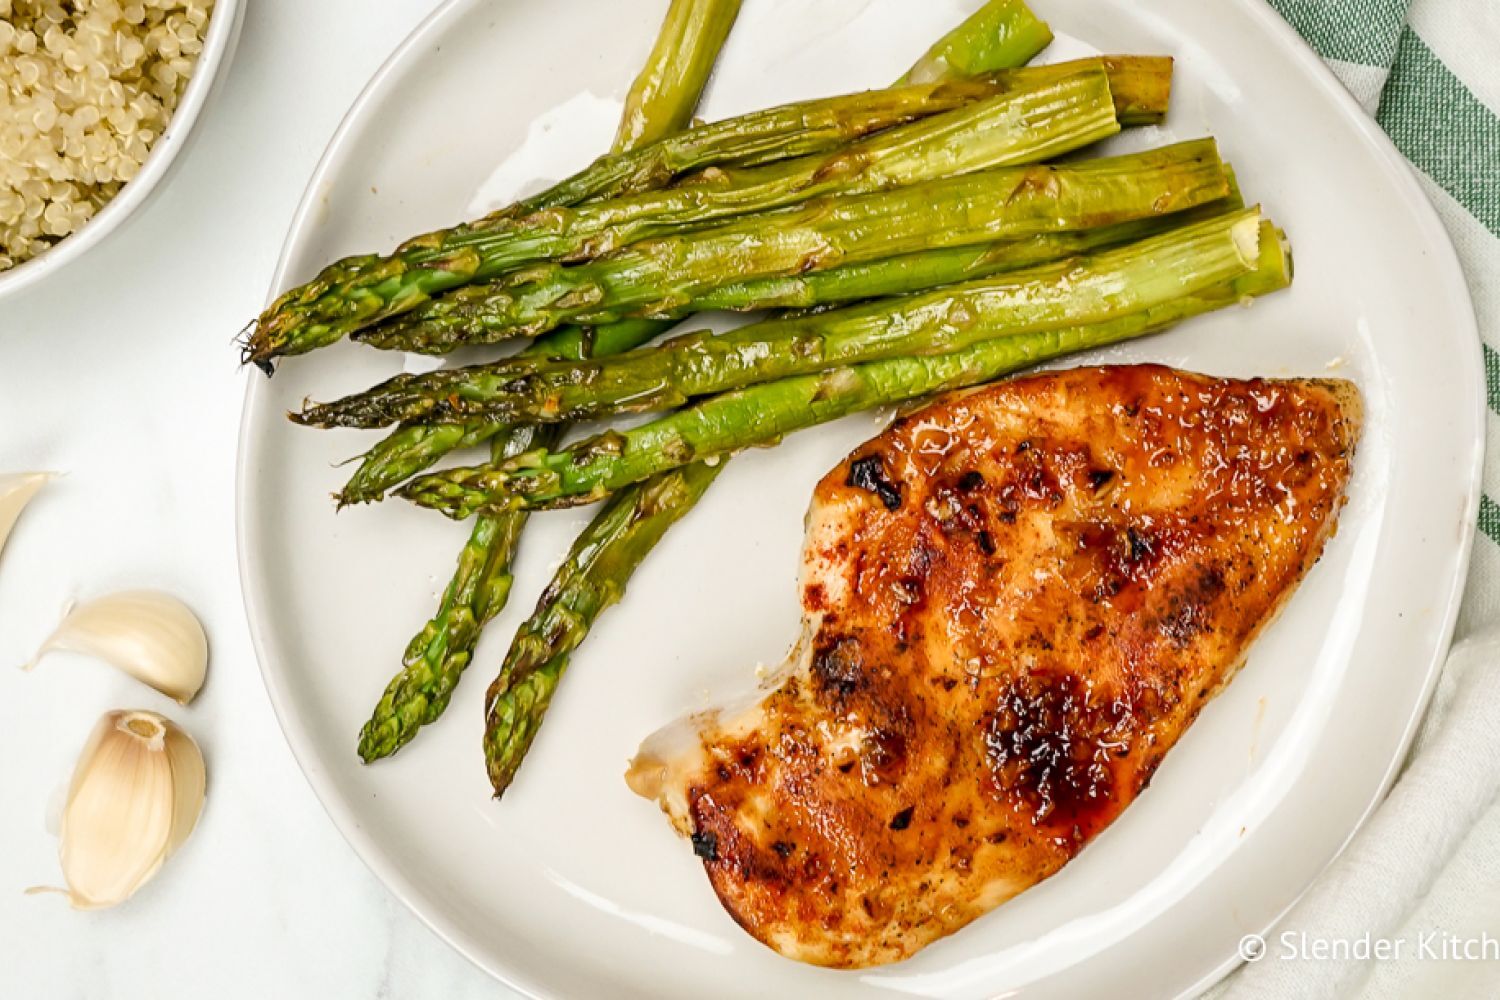 Honey garlic chicken on a plate with asparagus.